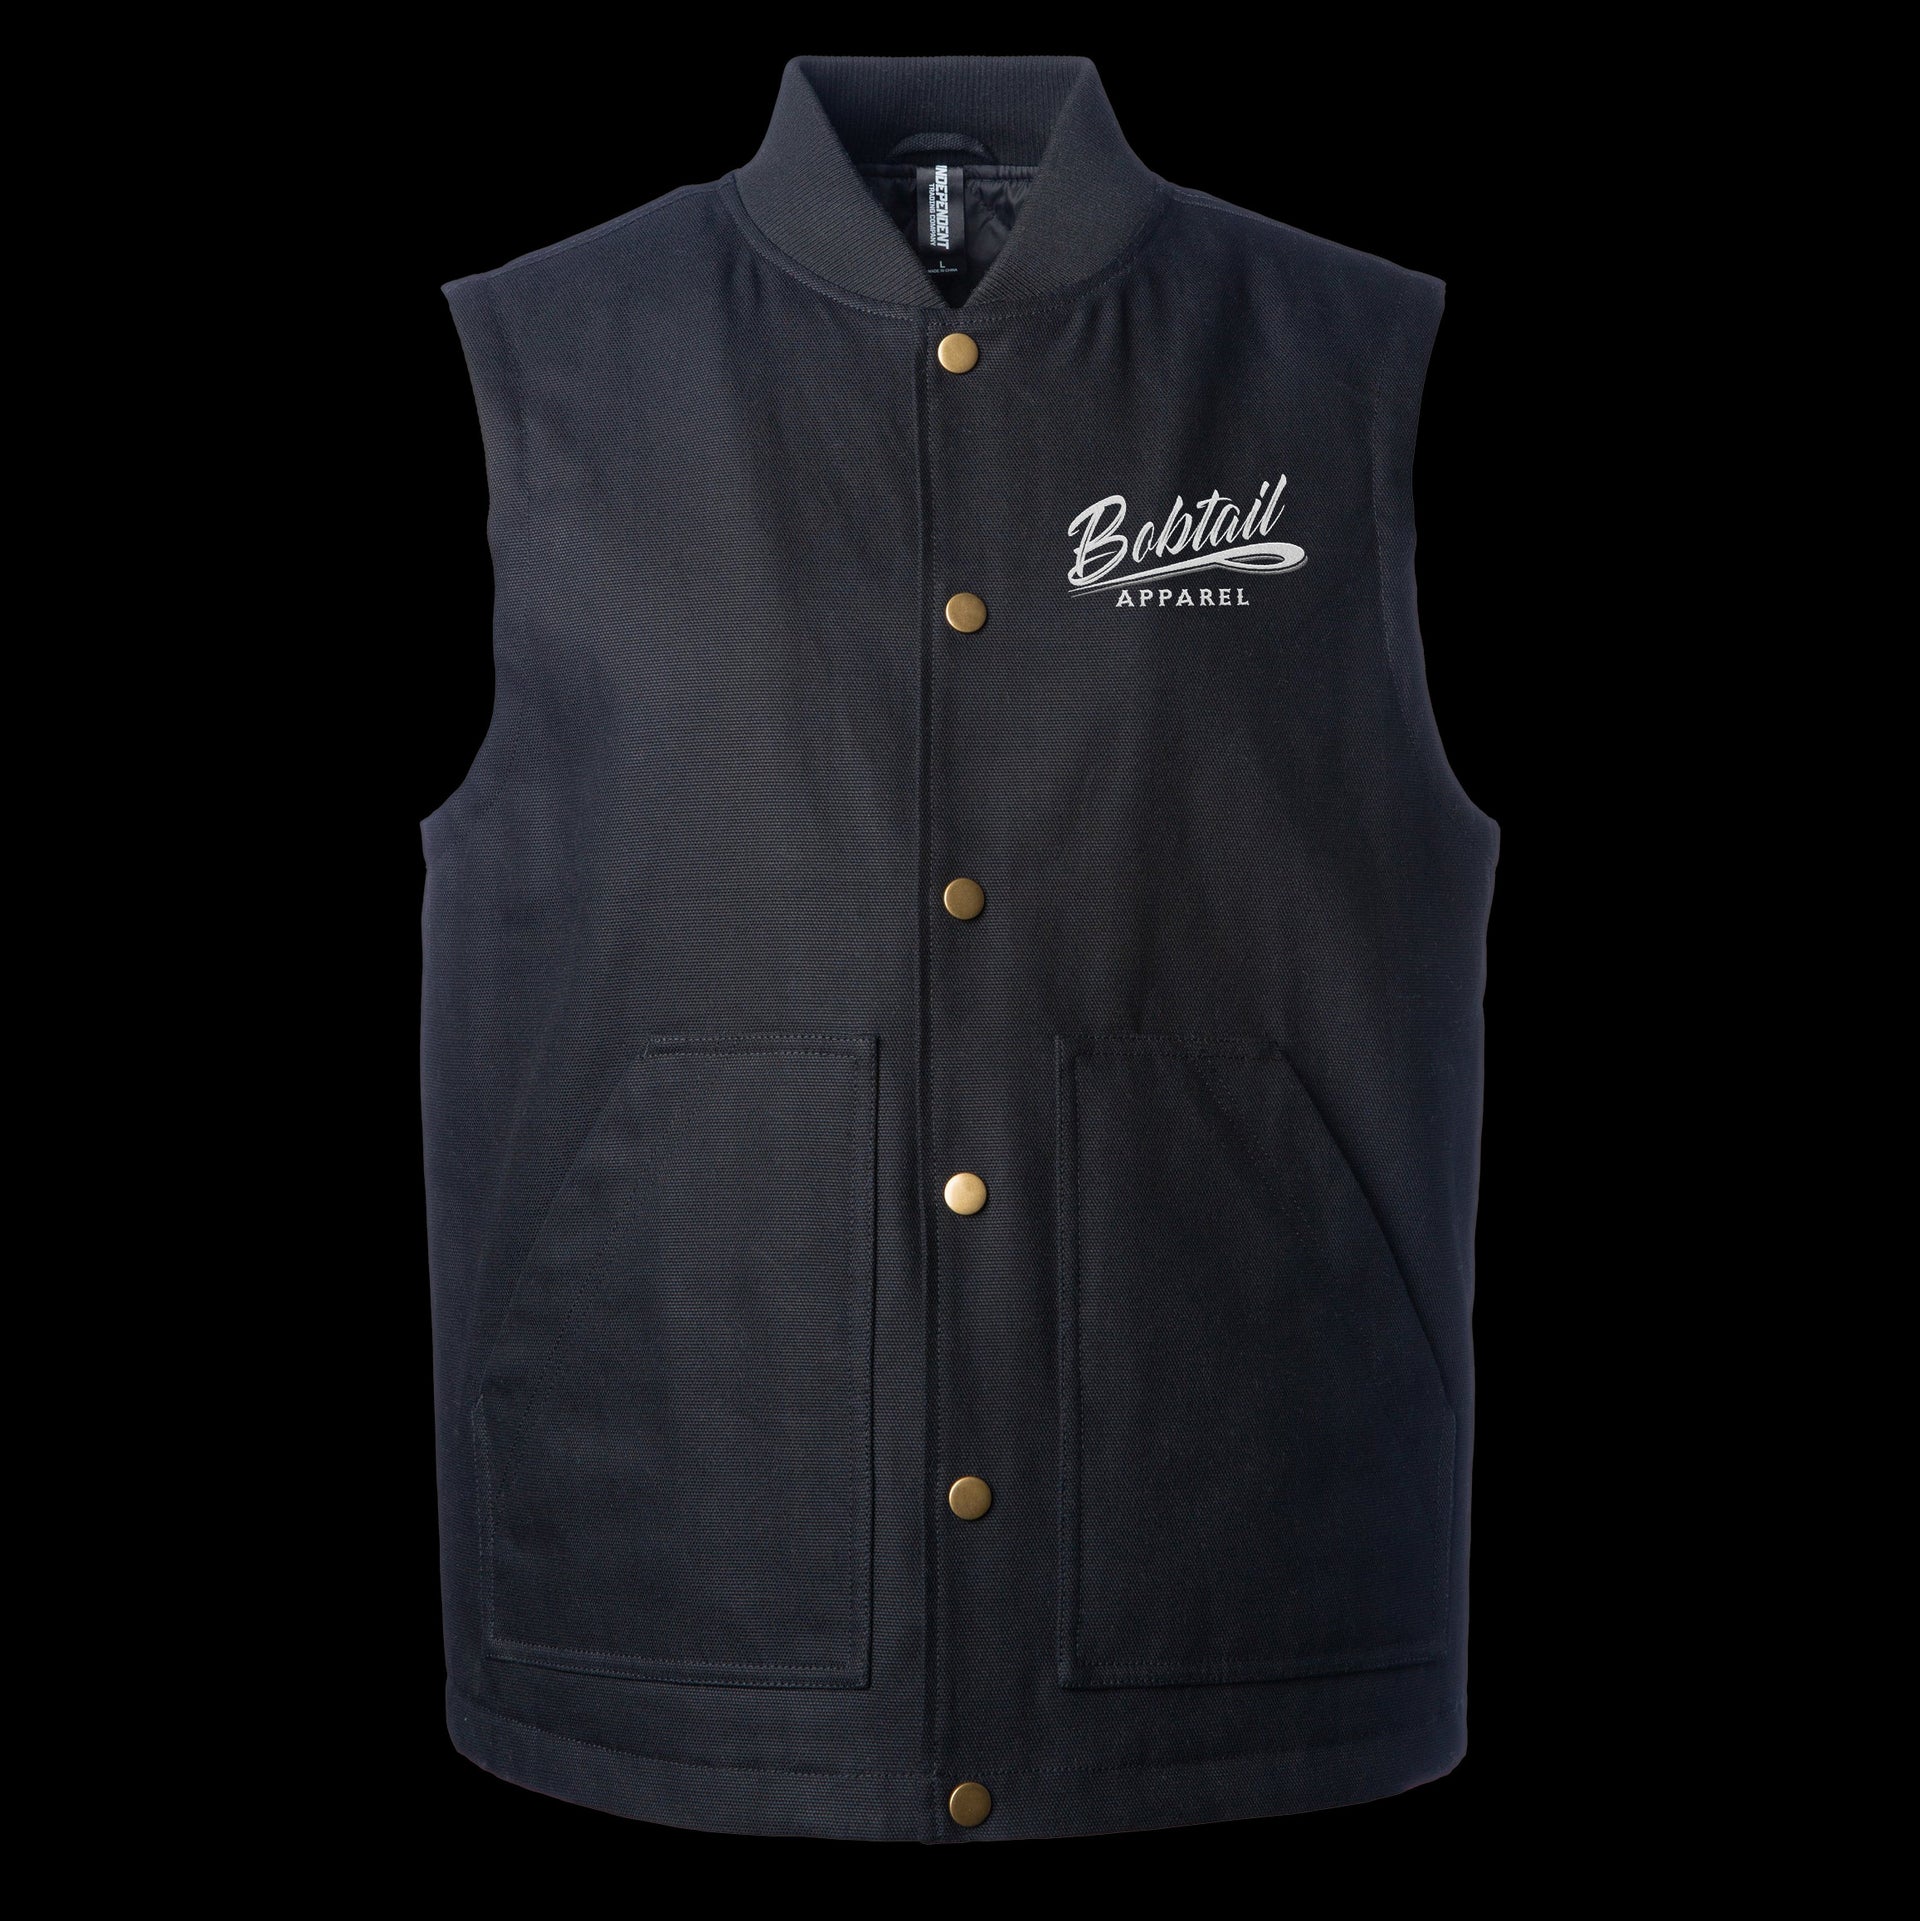 The Collection Logo Vest